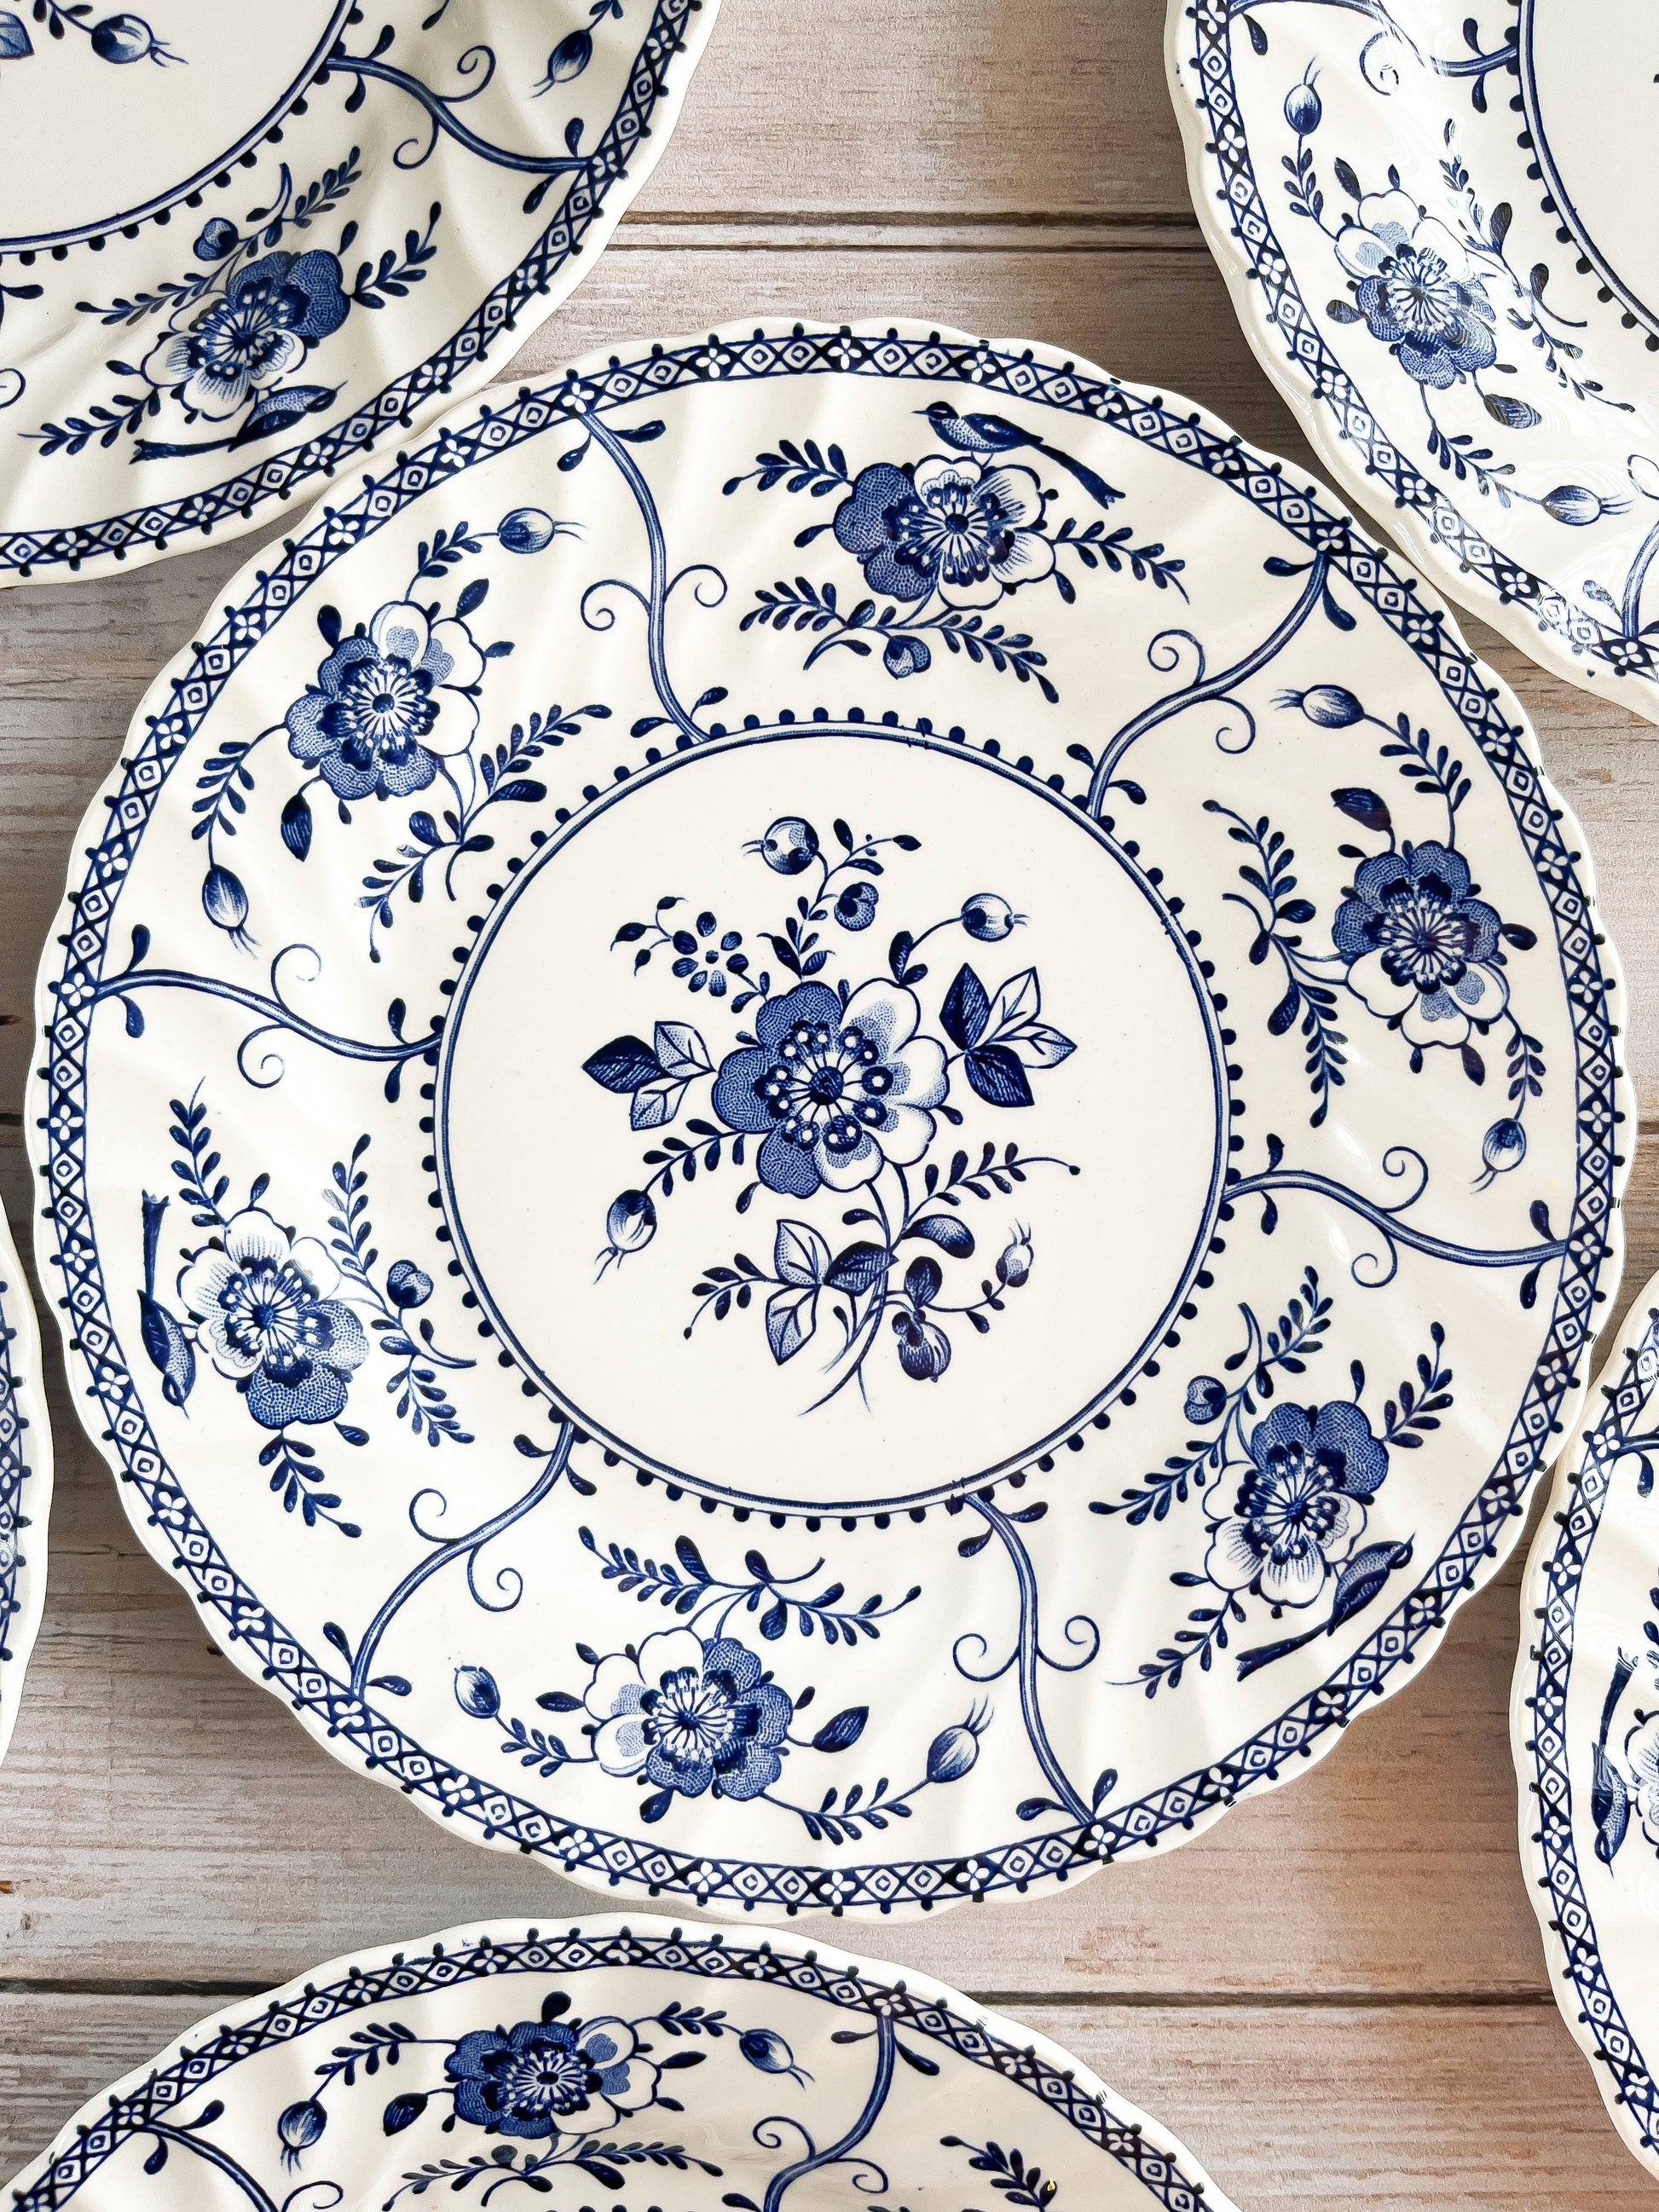 Johnson Bros Set of 6 Bread & Butter Plates - 'Indies' in Blue Collection - SOSC Home